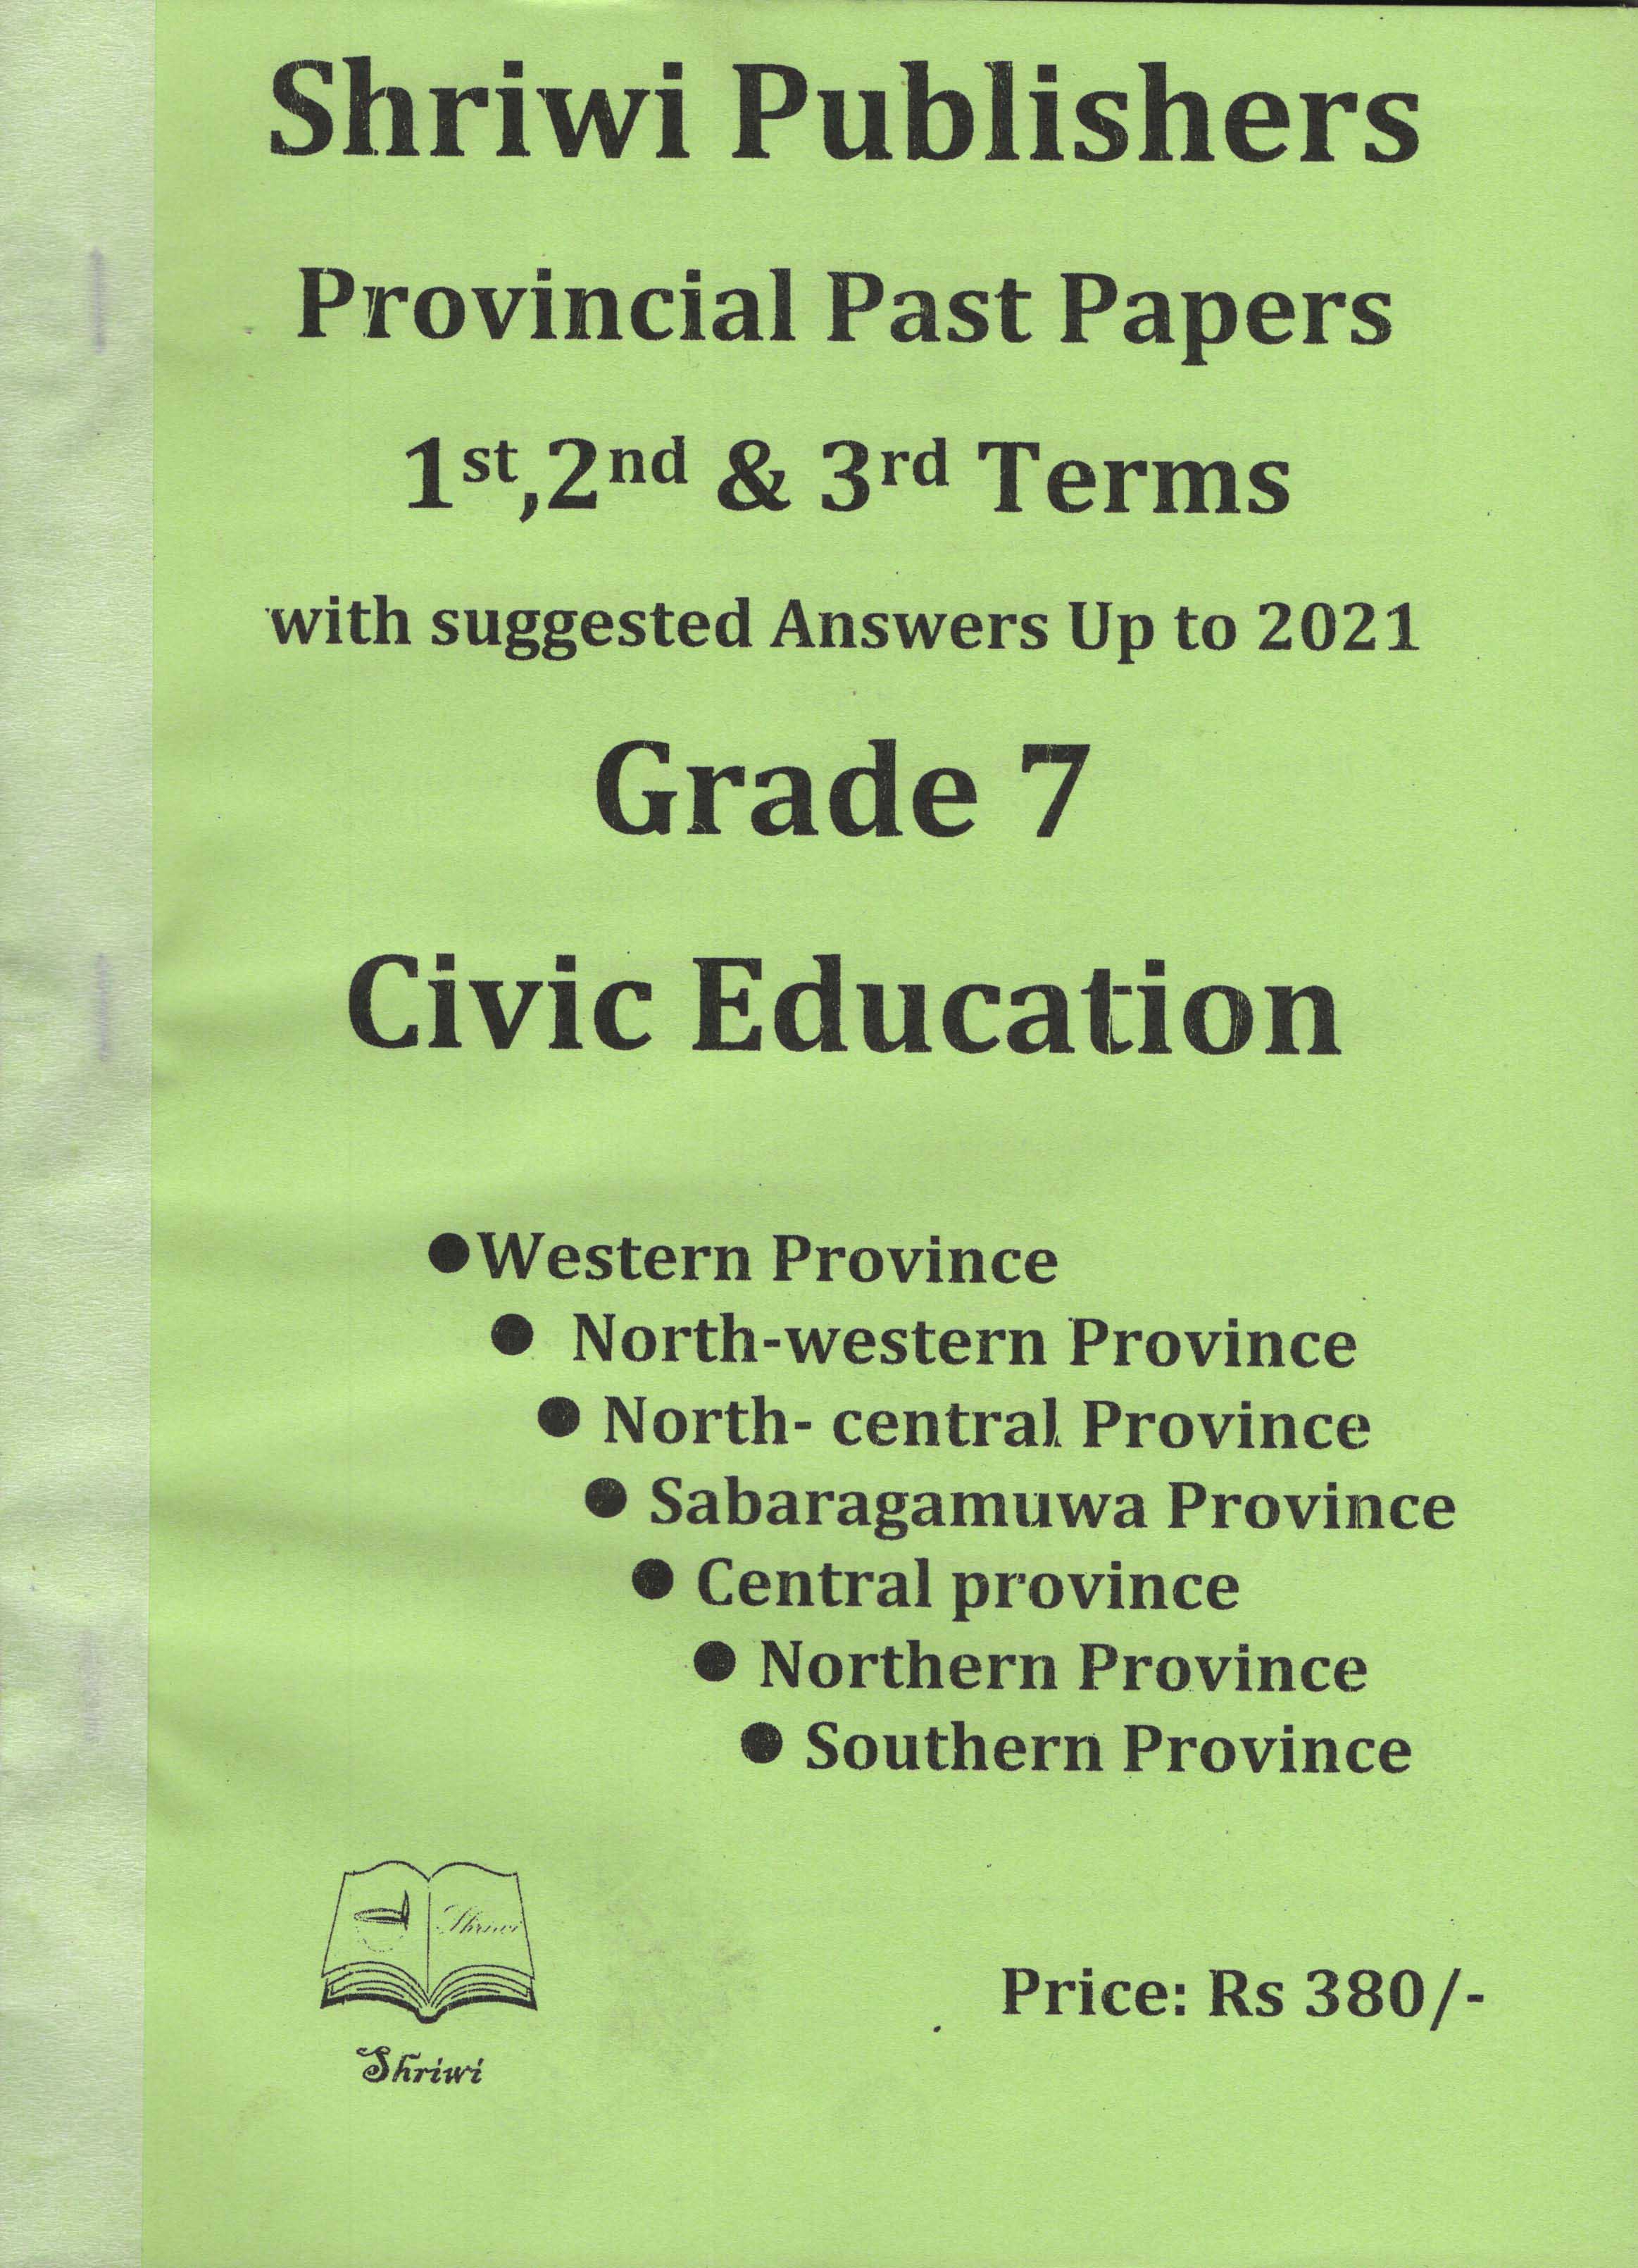 Shriwi Grade 7 Civic Education Provincial Past Papers 1st 2nd & 3rd Terms with Suggested Answers up to 2021